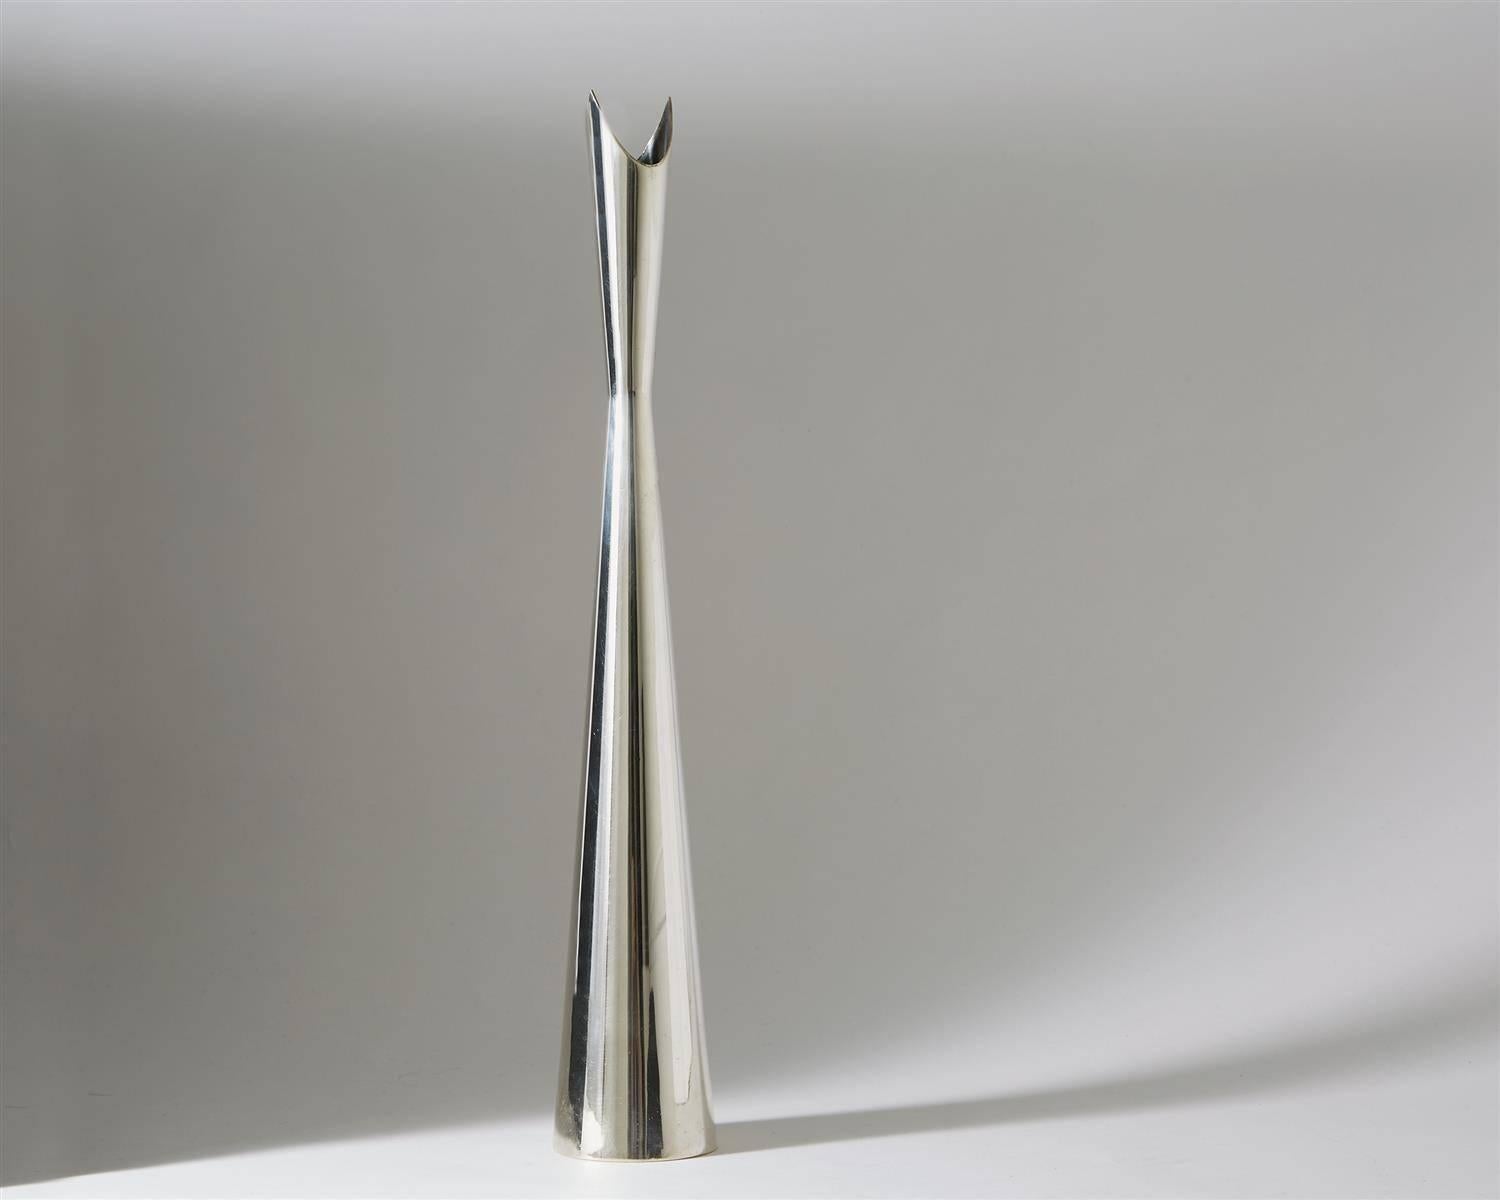 Vase, Cardinale. Designed by Lino Sabattini, Italy, 1950s.

Silver plated brass.

Measures: H 37 cm/ 14 1/2